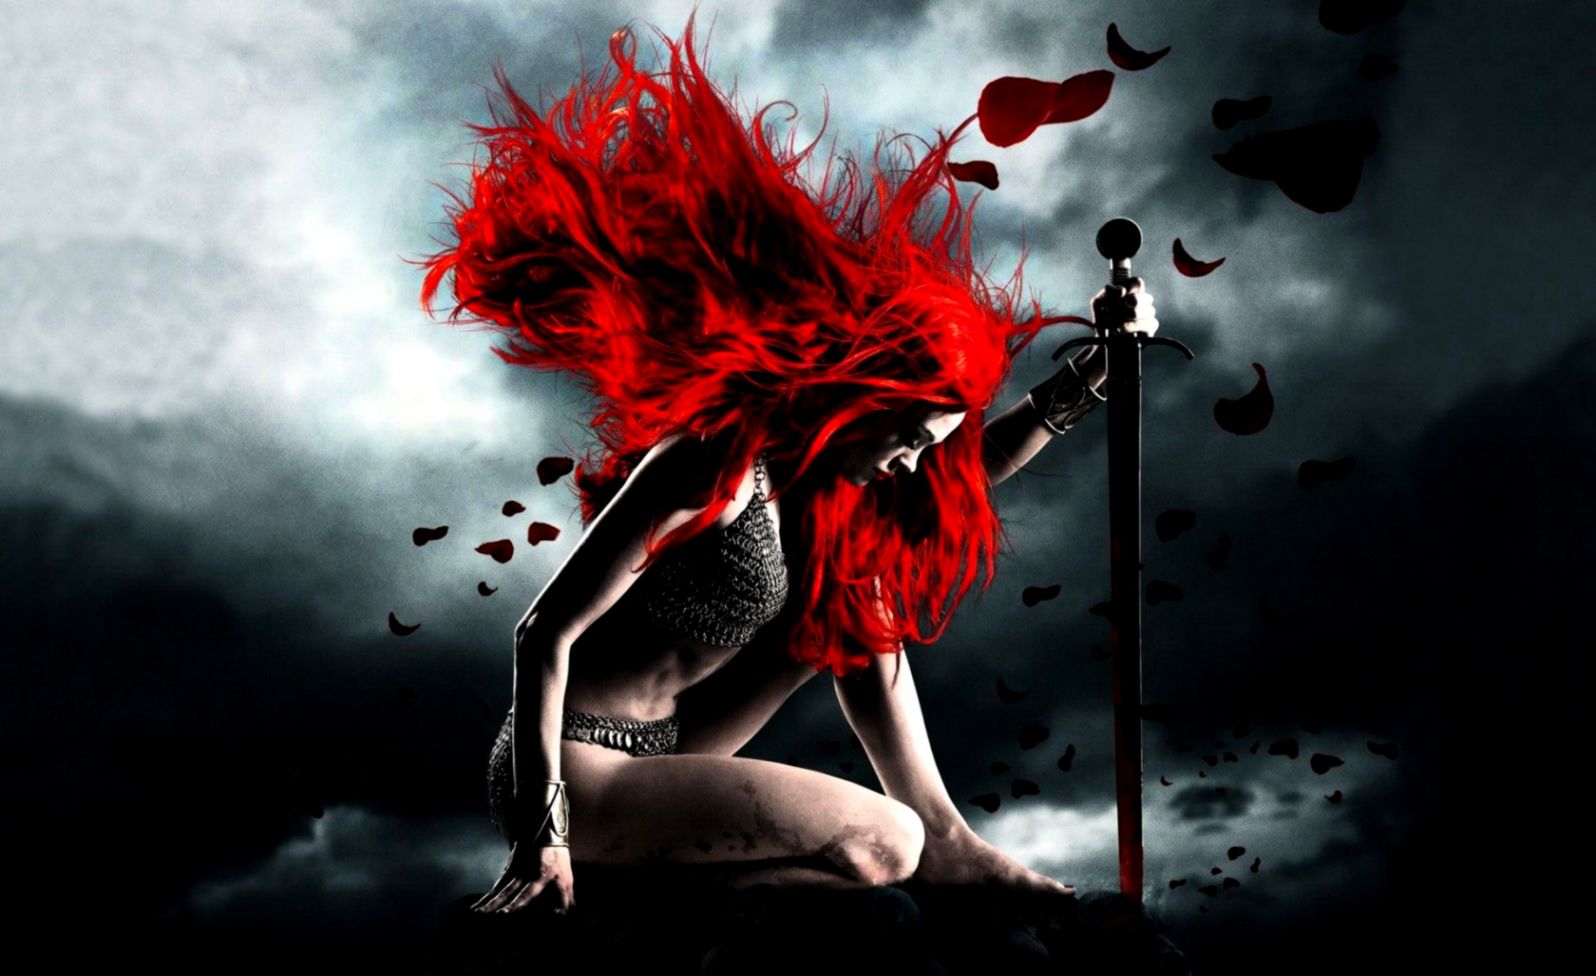 3d Red Head Amazing Fantasy Wallpapers Desktop Background - Red Hair Warrior Woman - HD Wallpaper 